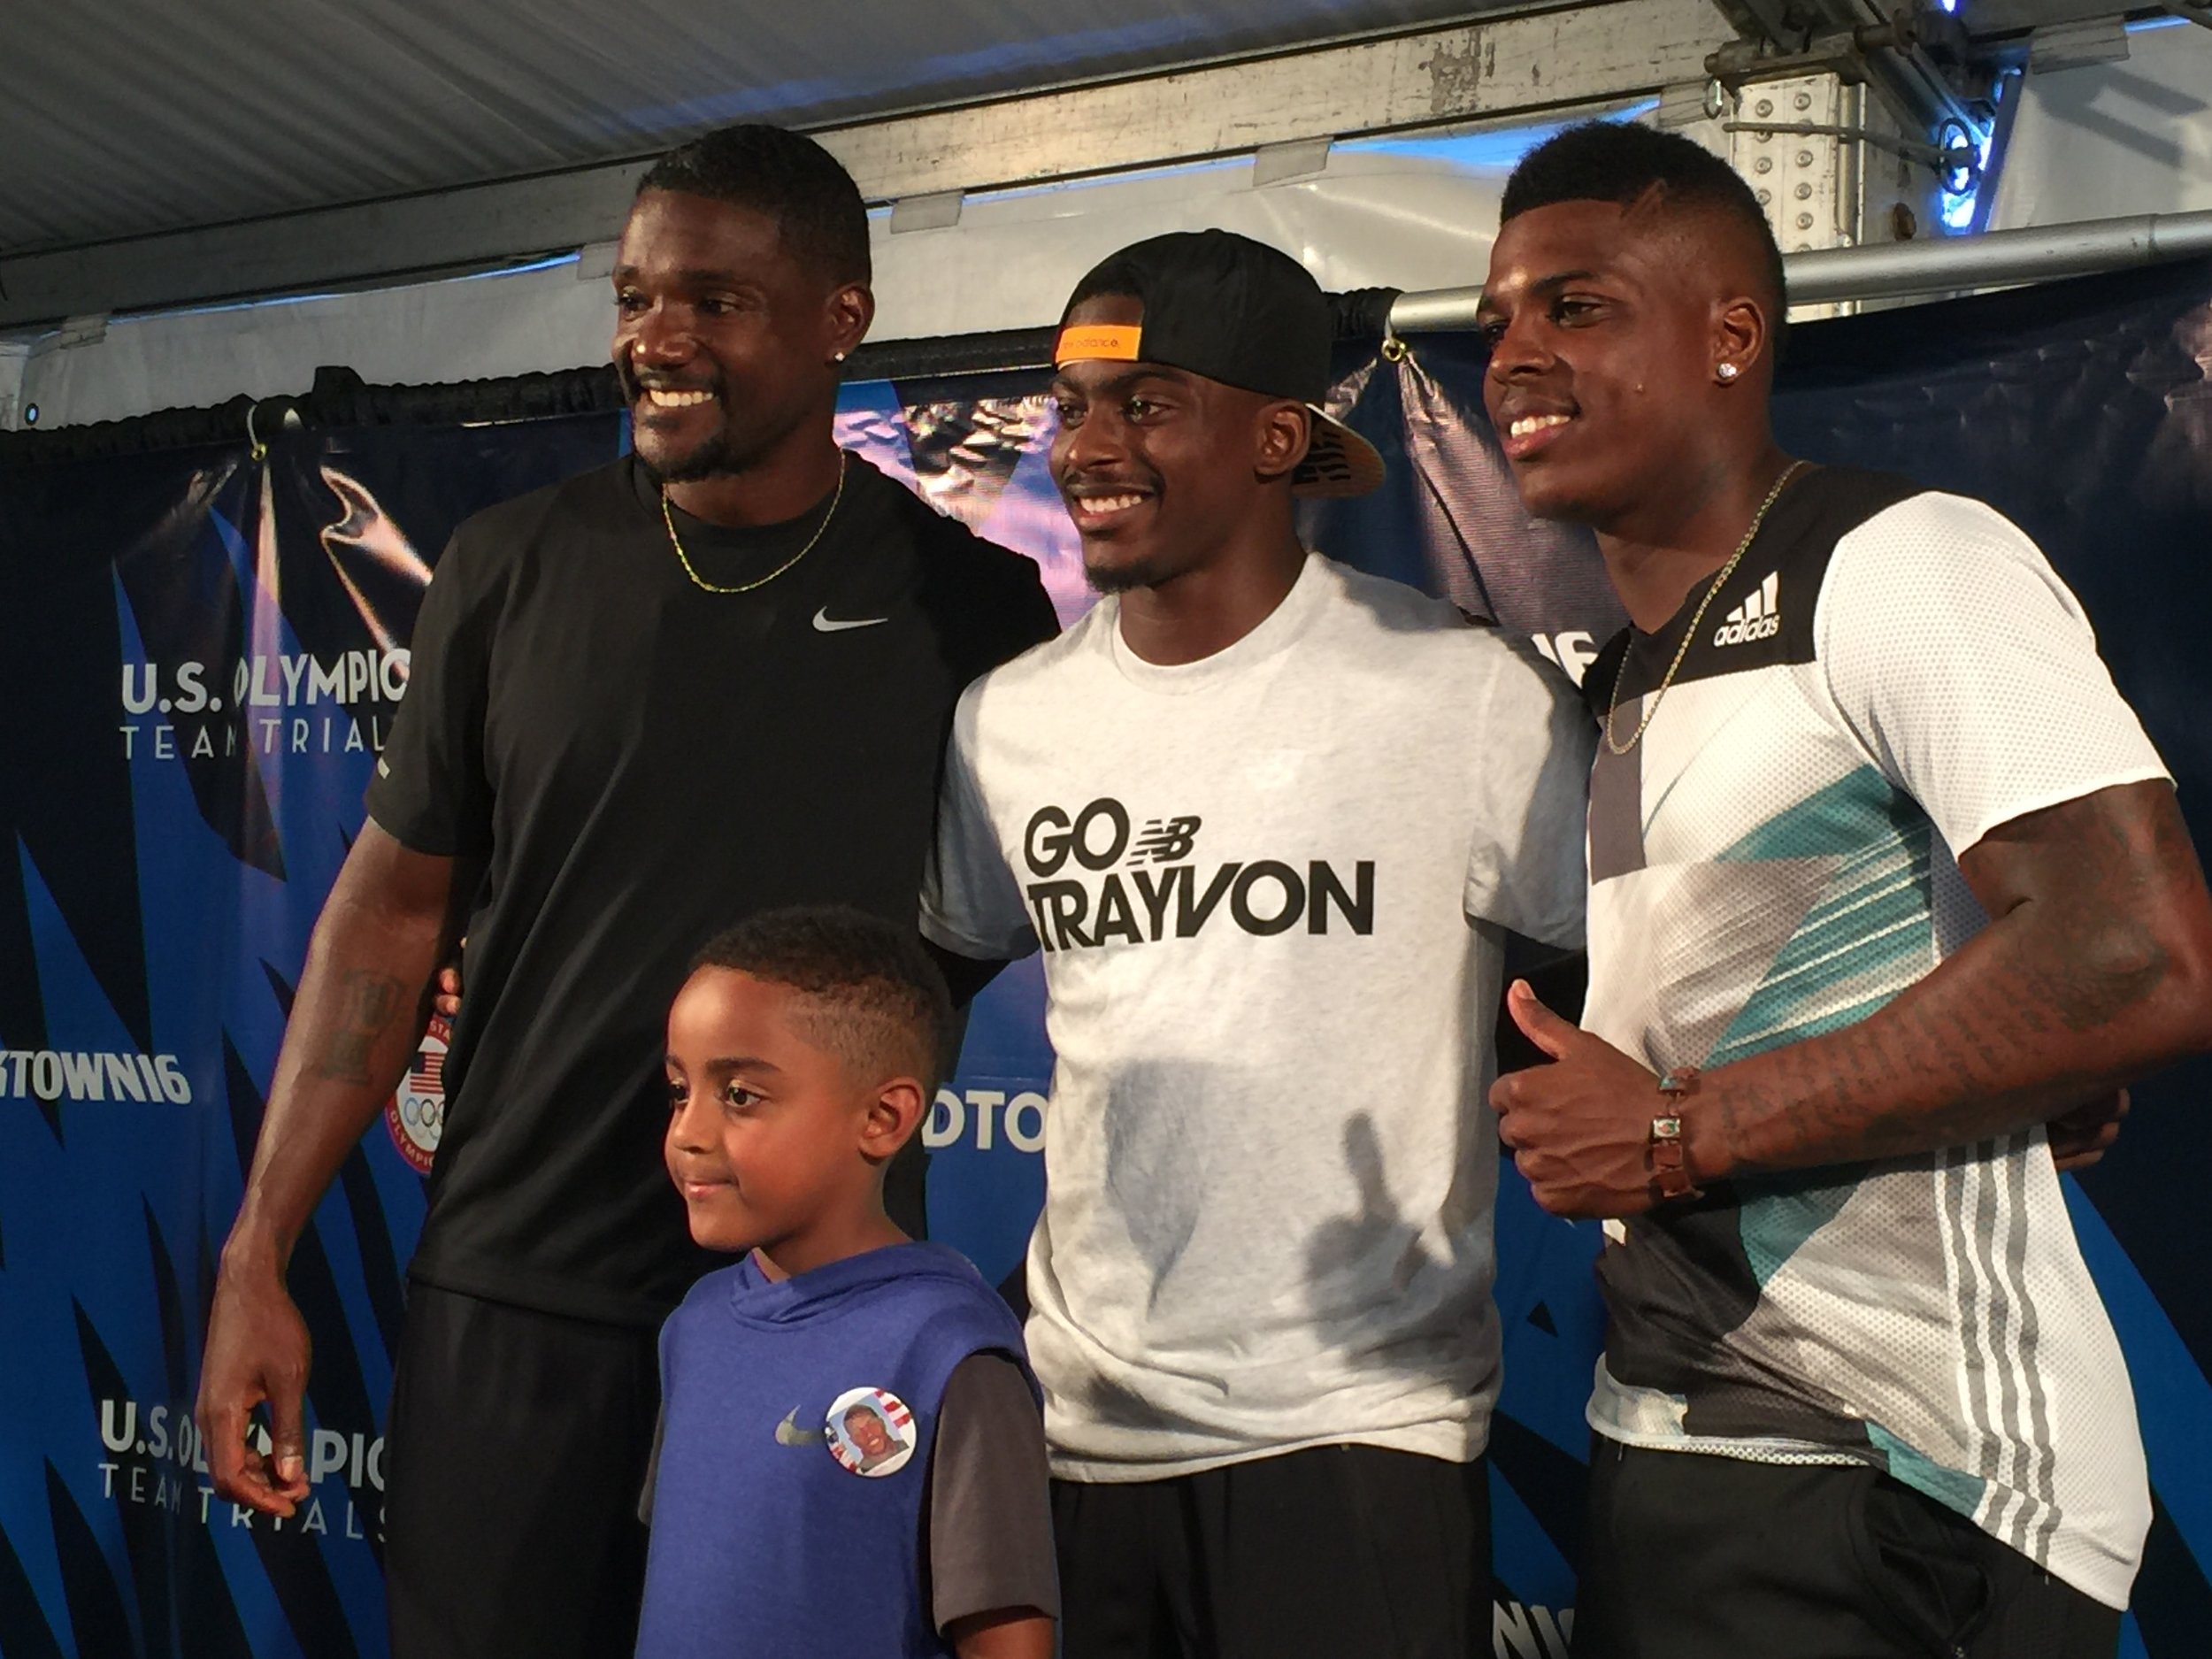 Justin and Jace Gatlin, Trayvon Bromell and Marvin Bracy after the race 